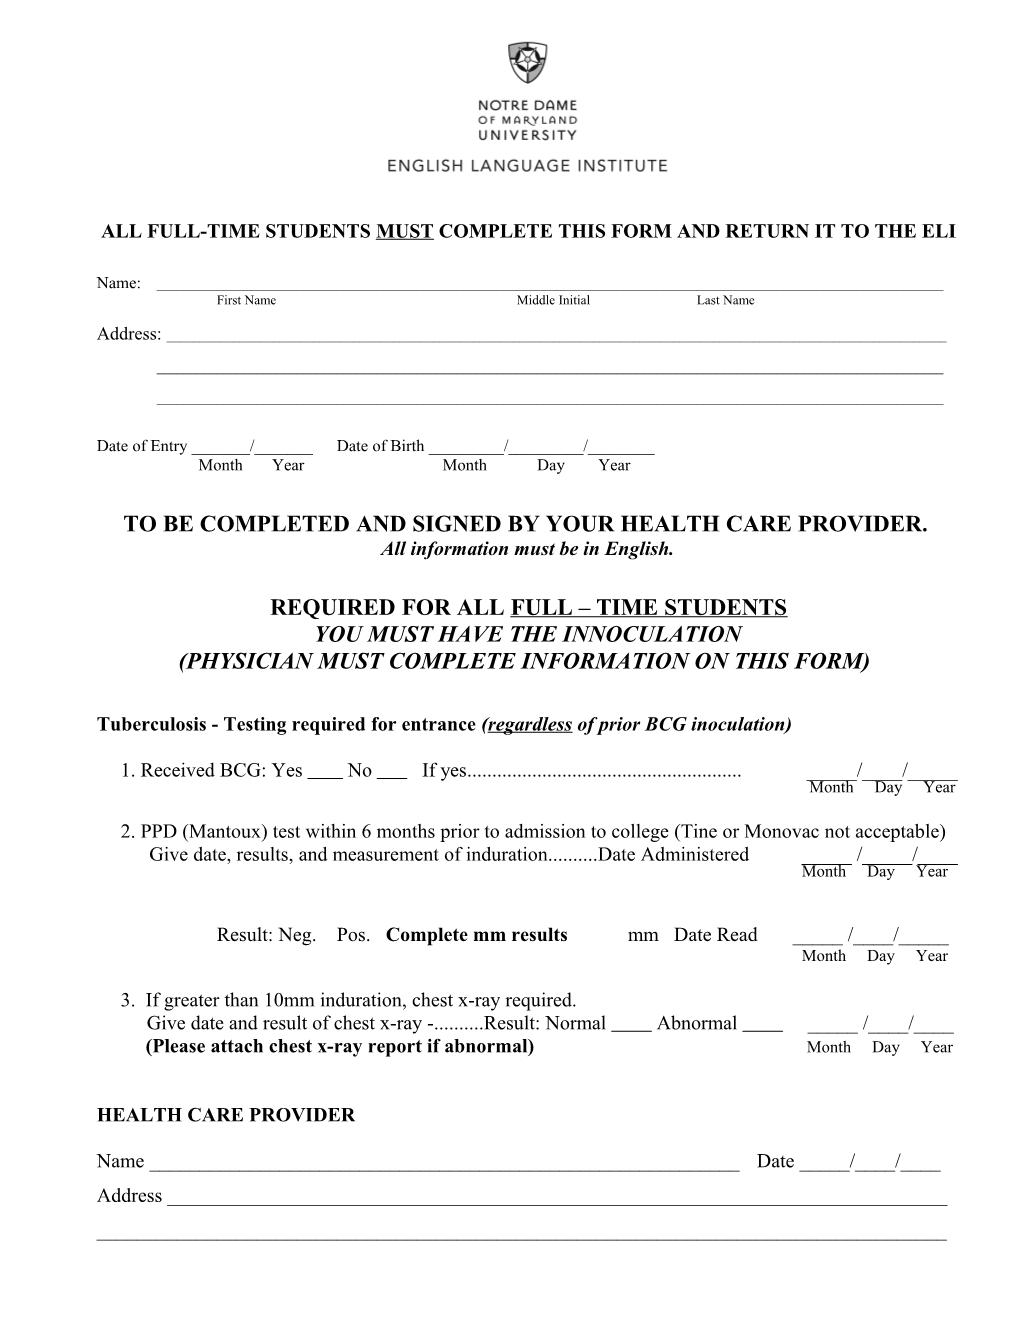 All Full-Time Students Must Complete This Form and Return It to the Eli